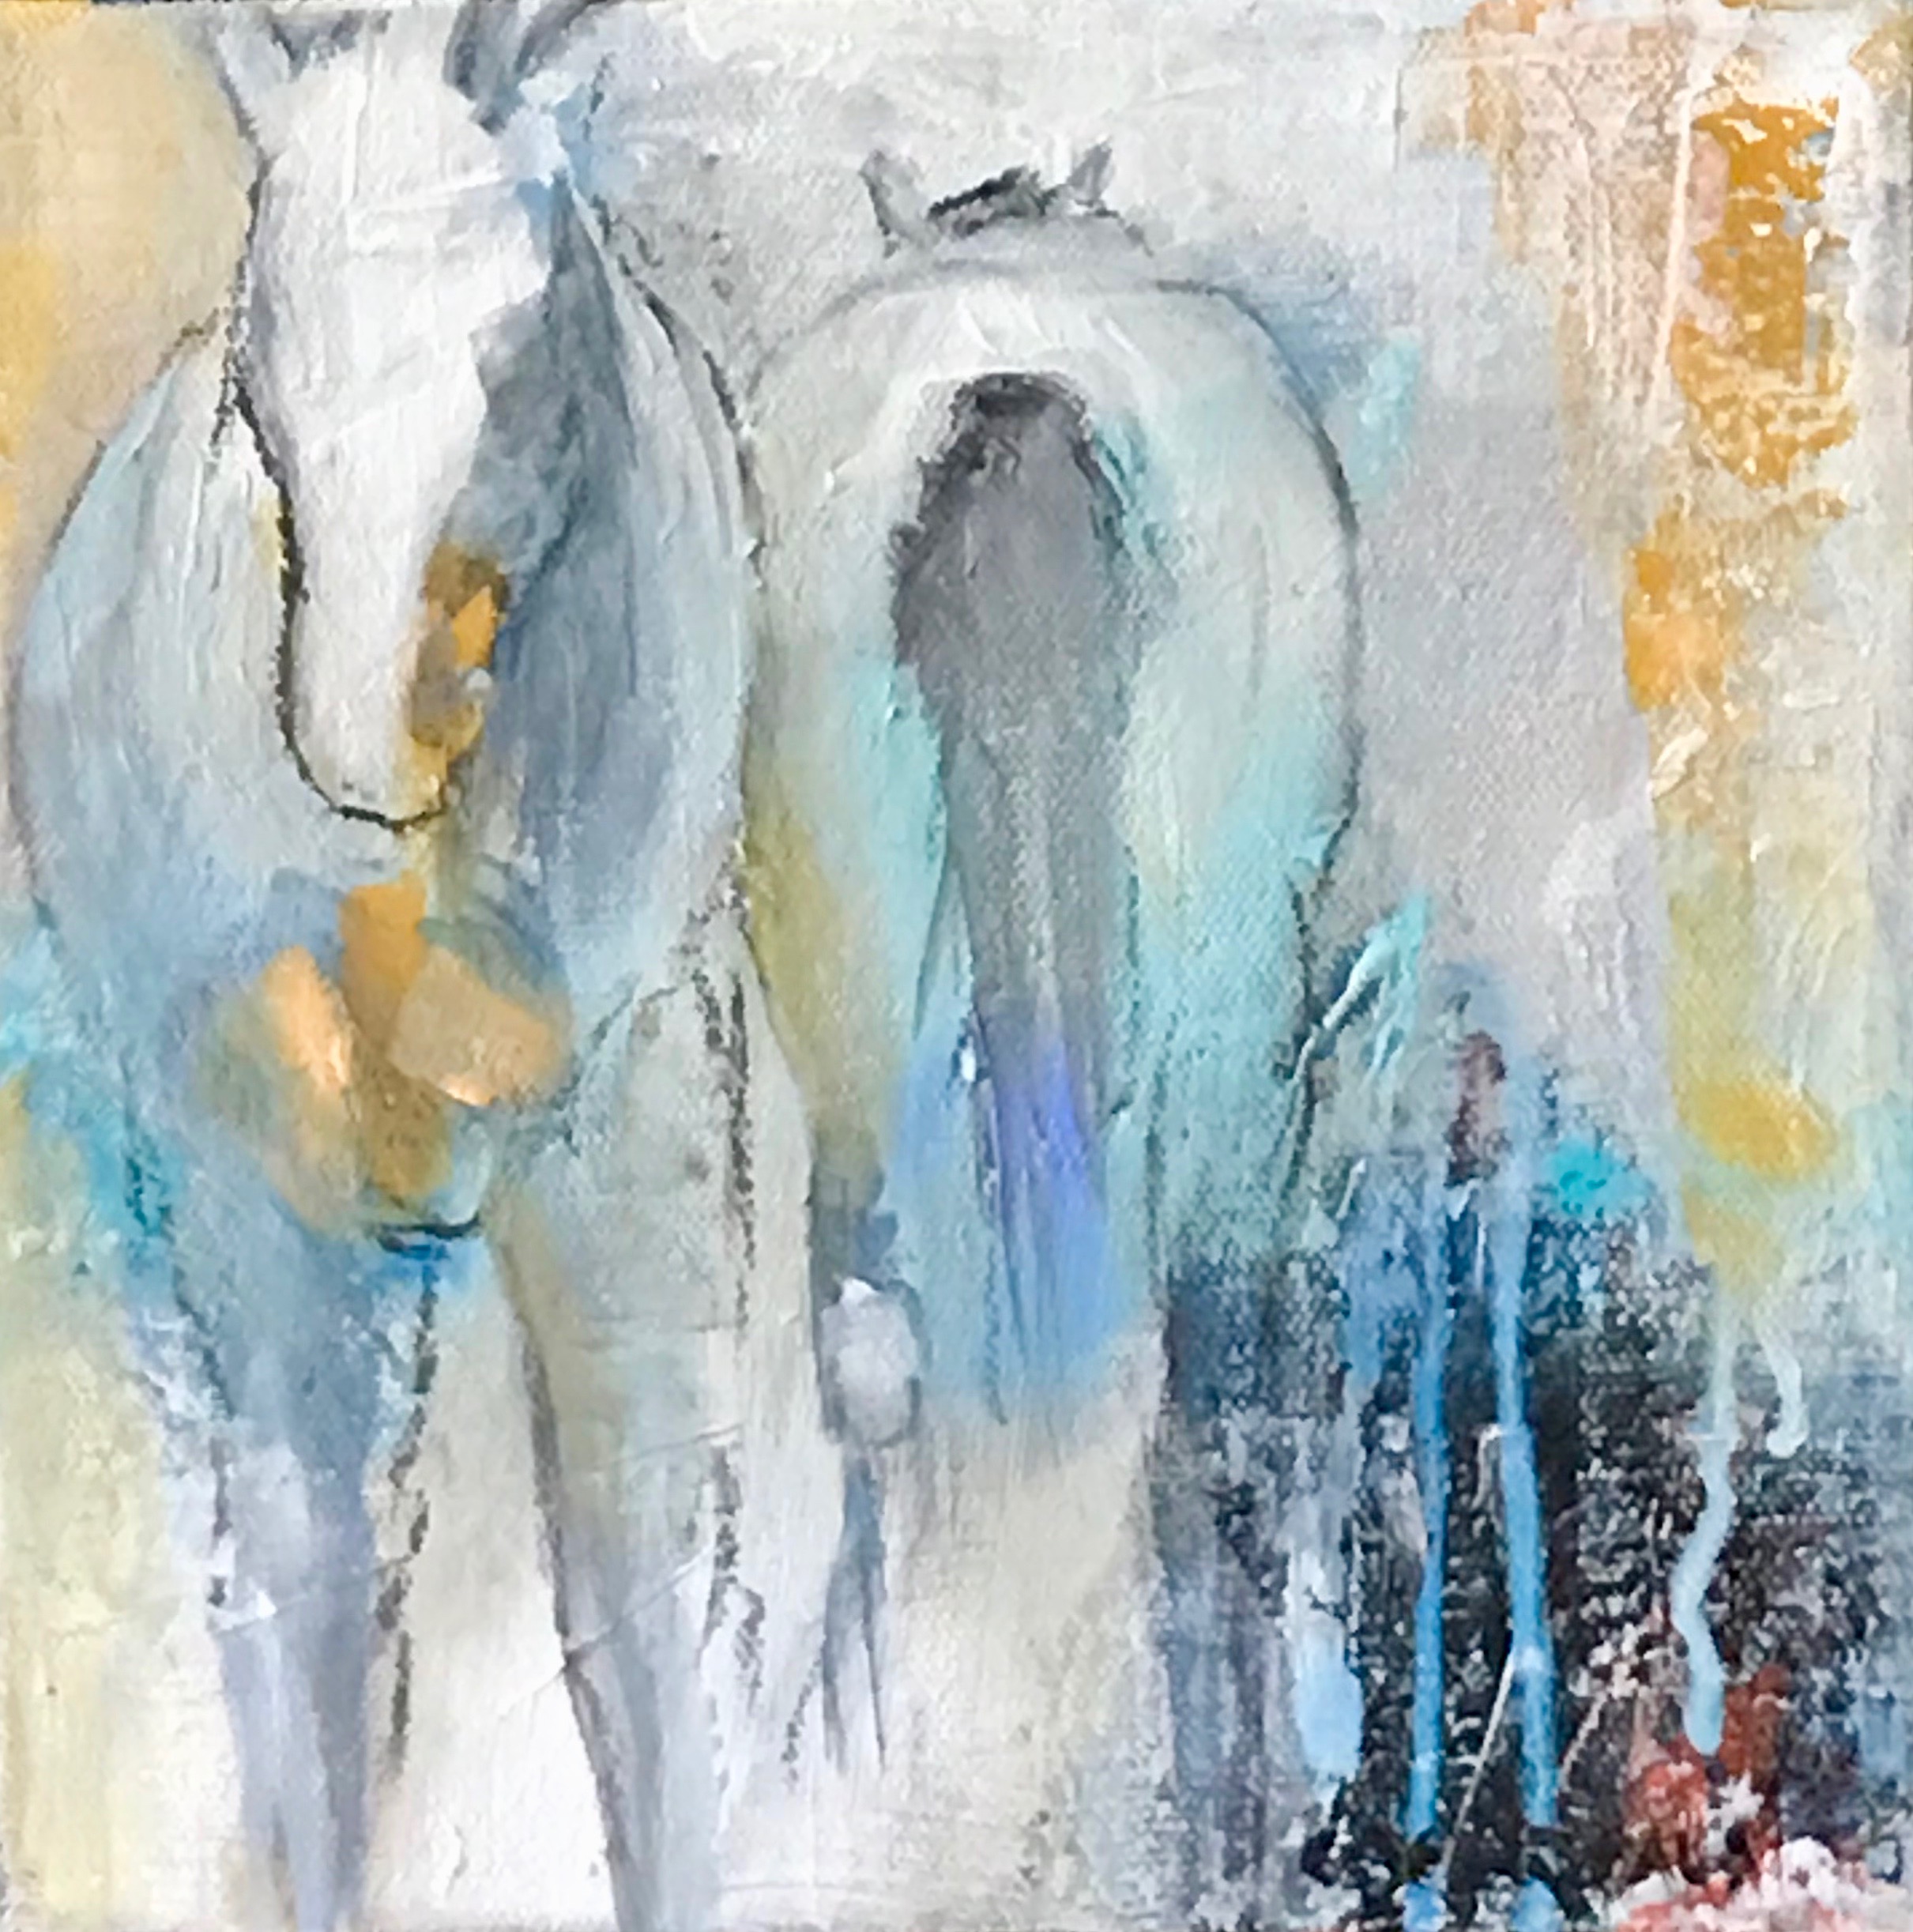 'Small 100' 8x8 Contemporary Modern Equine Horse Painting by Cher Devereaux on stretched canvas